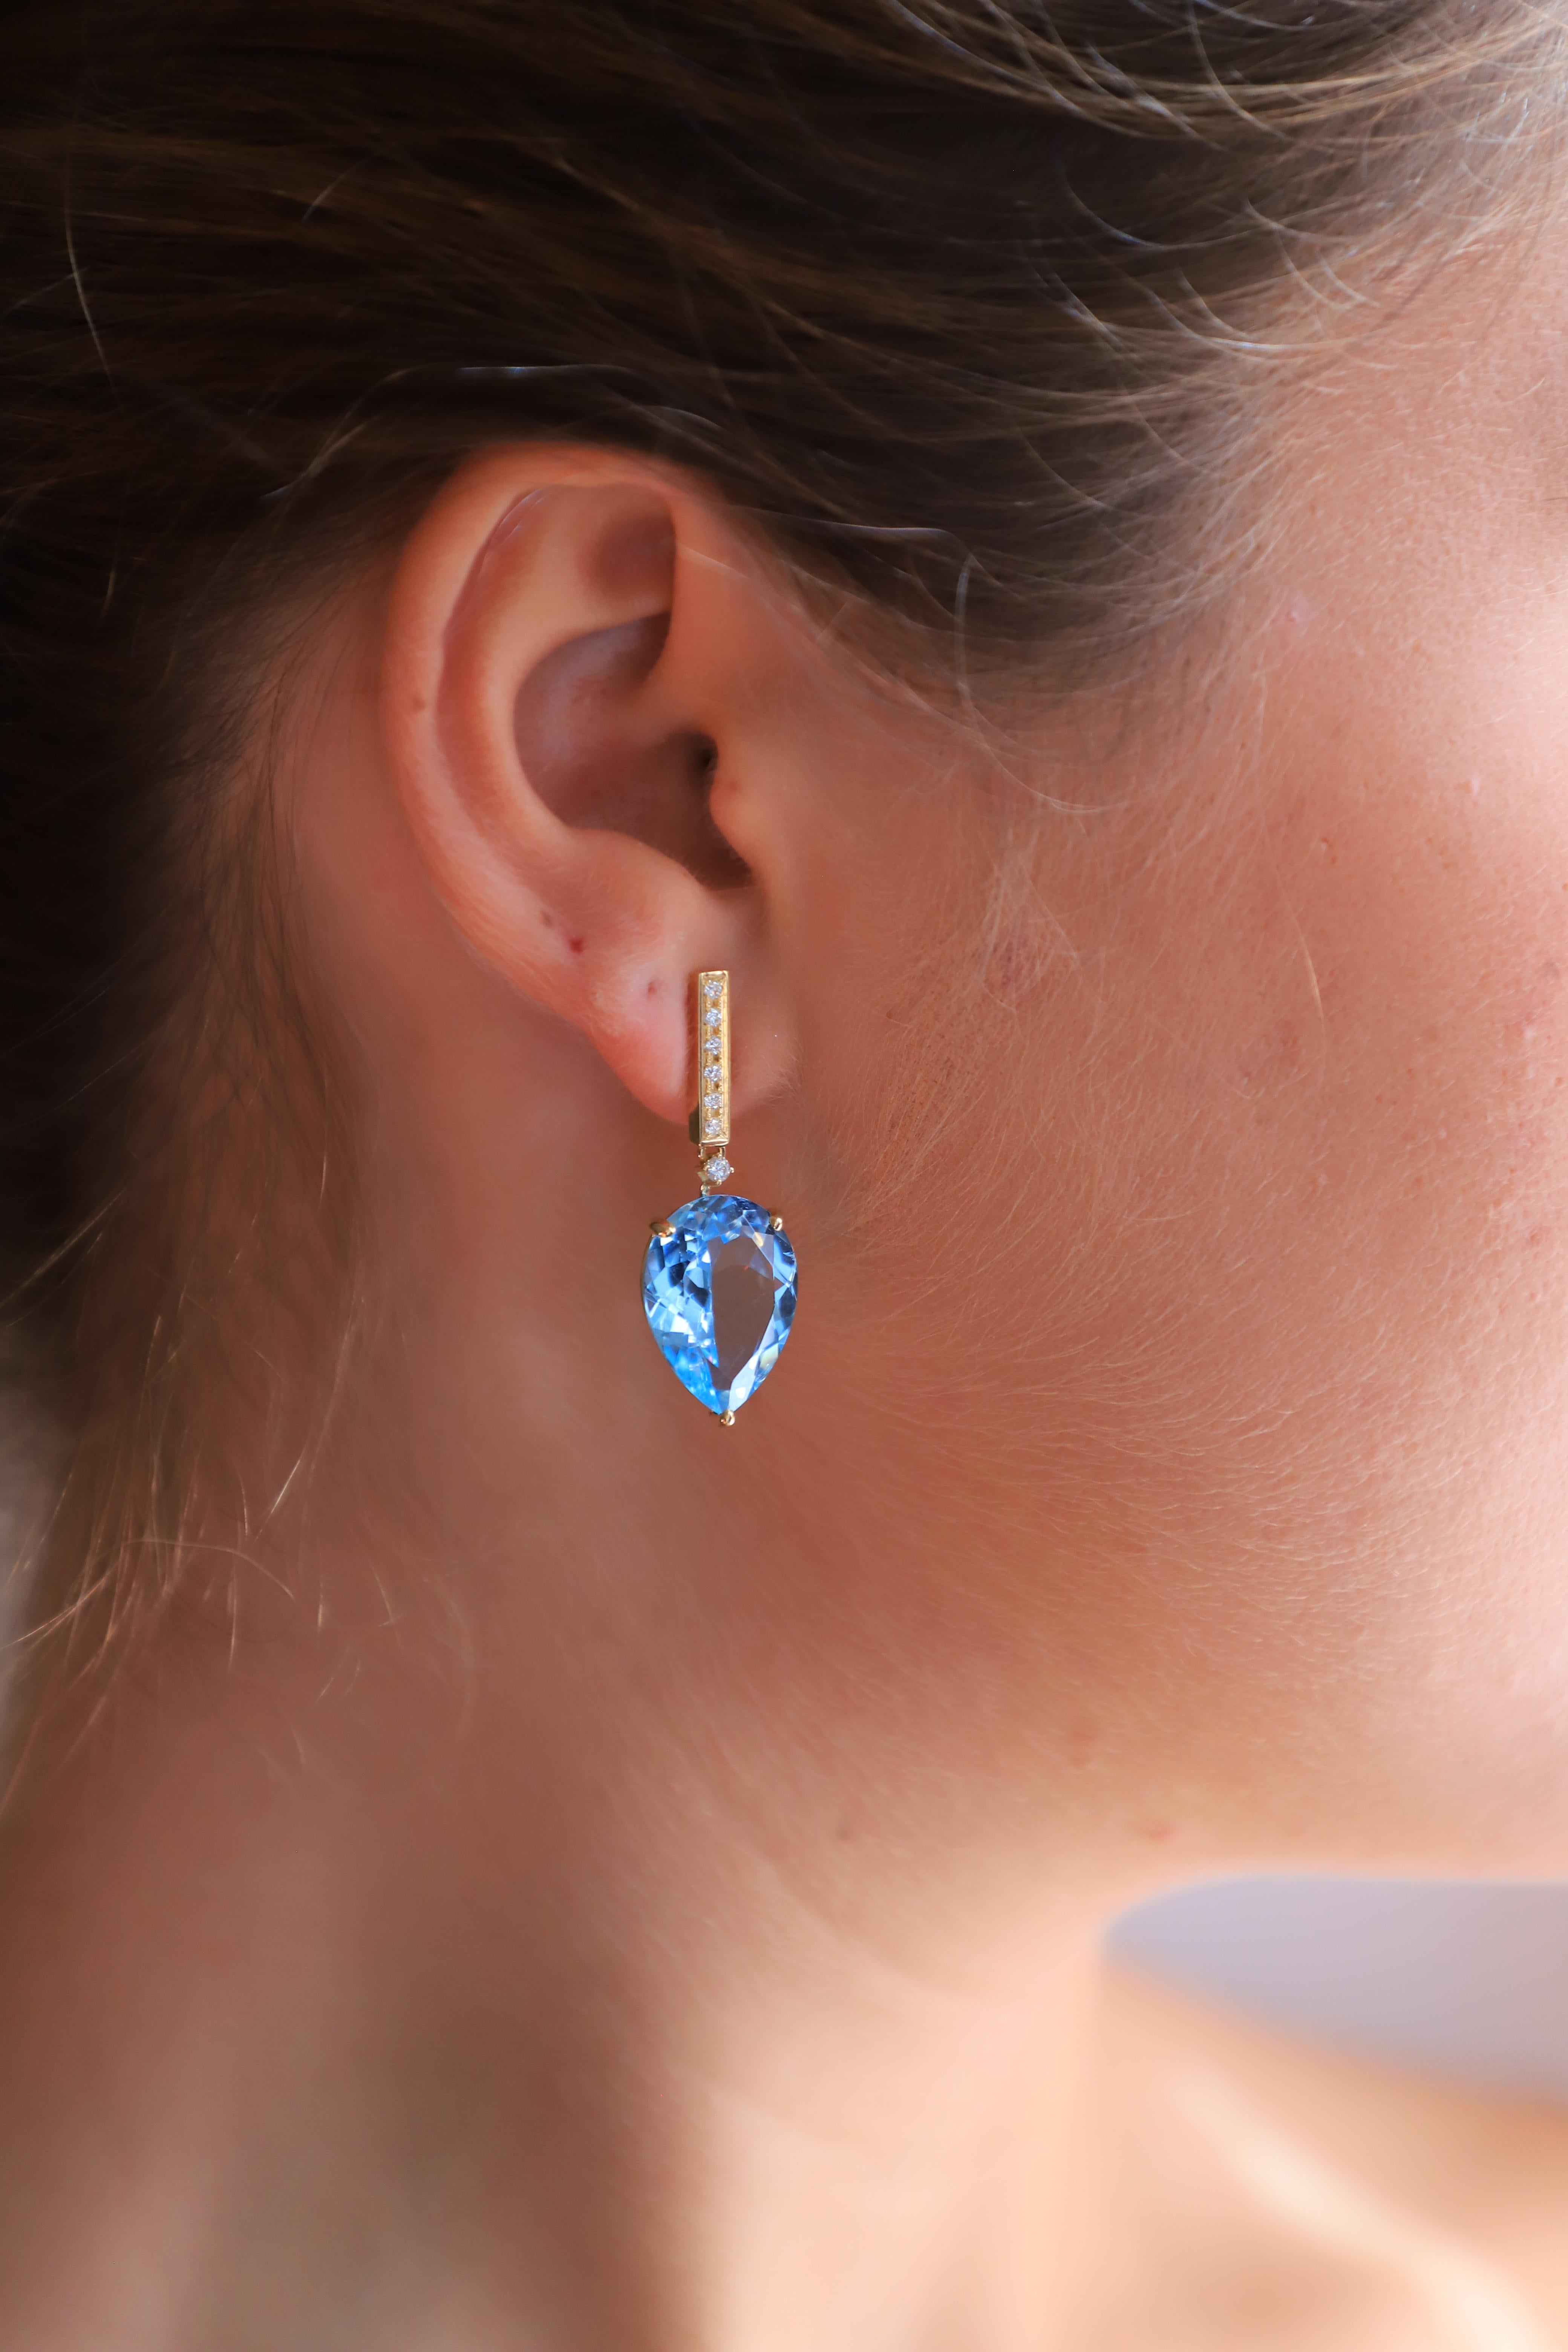 Bold Art Deco Style 18 Karat White&Yellow Gold Blue Topaz 0.06 Karat White Diamonds Dangle Earrings
Drips of rain, whose topaz drop-shaped stones seems to be about to break away from the trickle of yellow gold it leaves behind.
Item in stock,